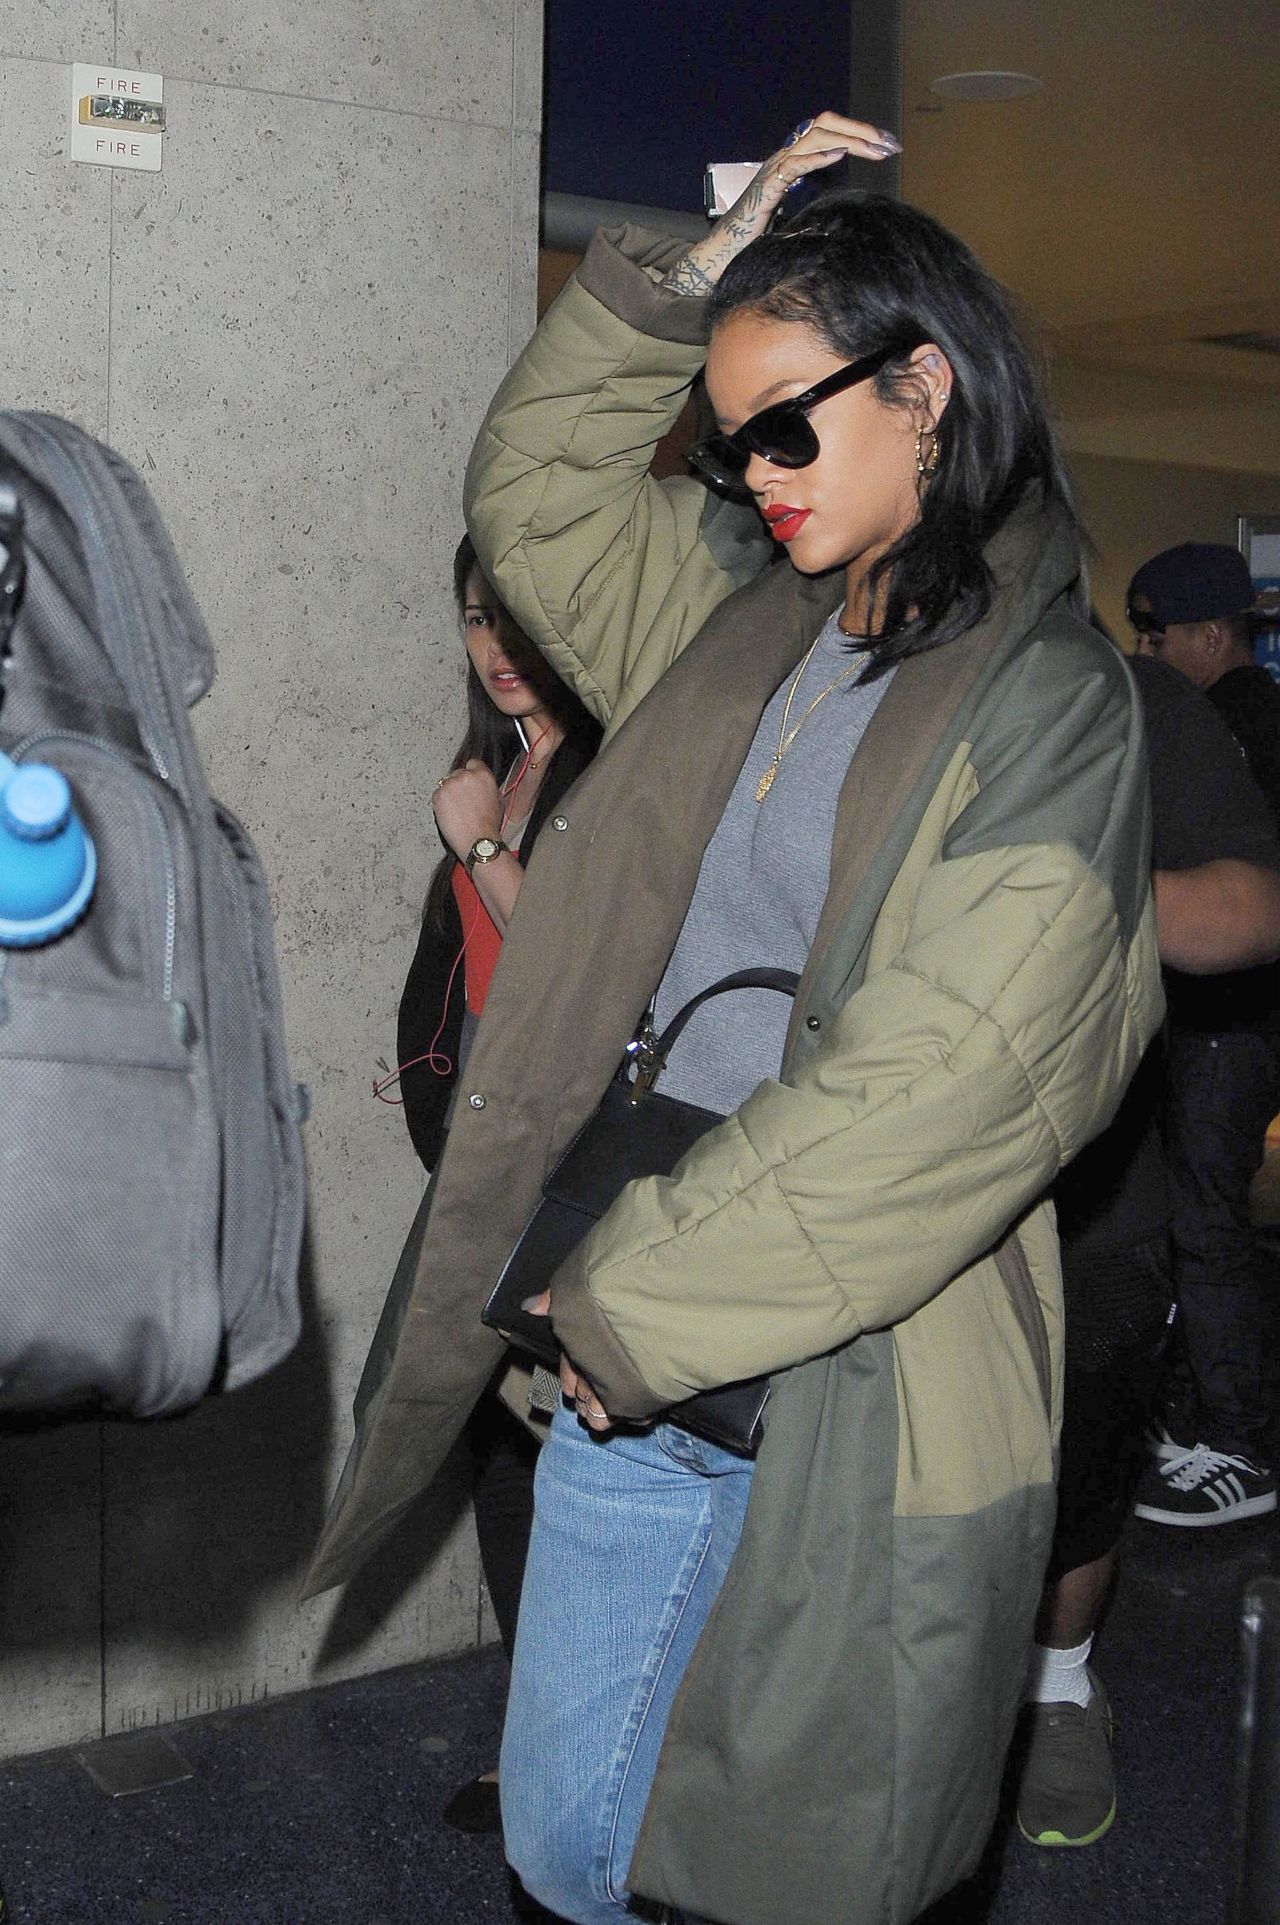 Rihanna in Jeans - Arriving at LAX Airport in Los Angeles, Sept. 2014 ...